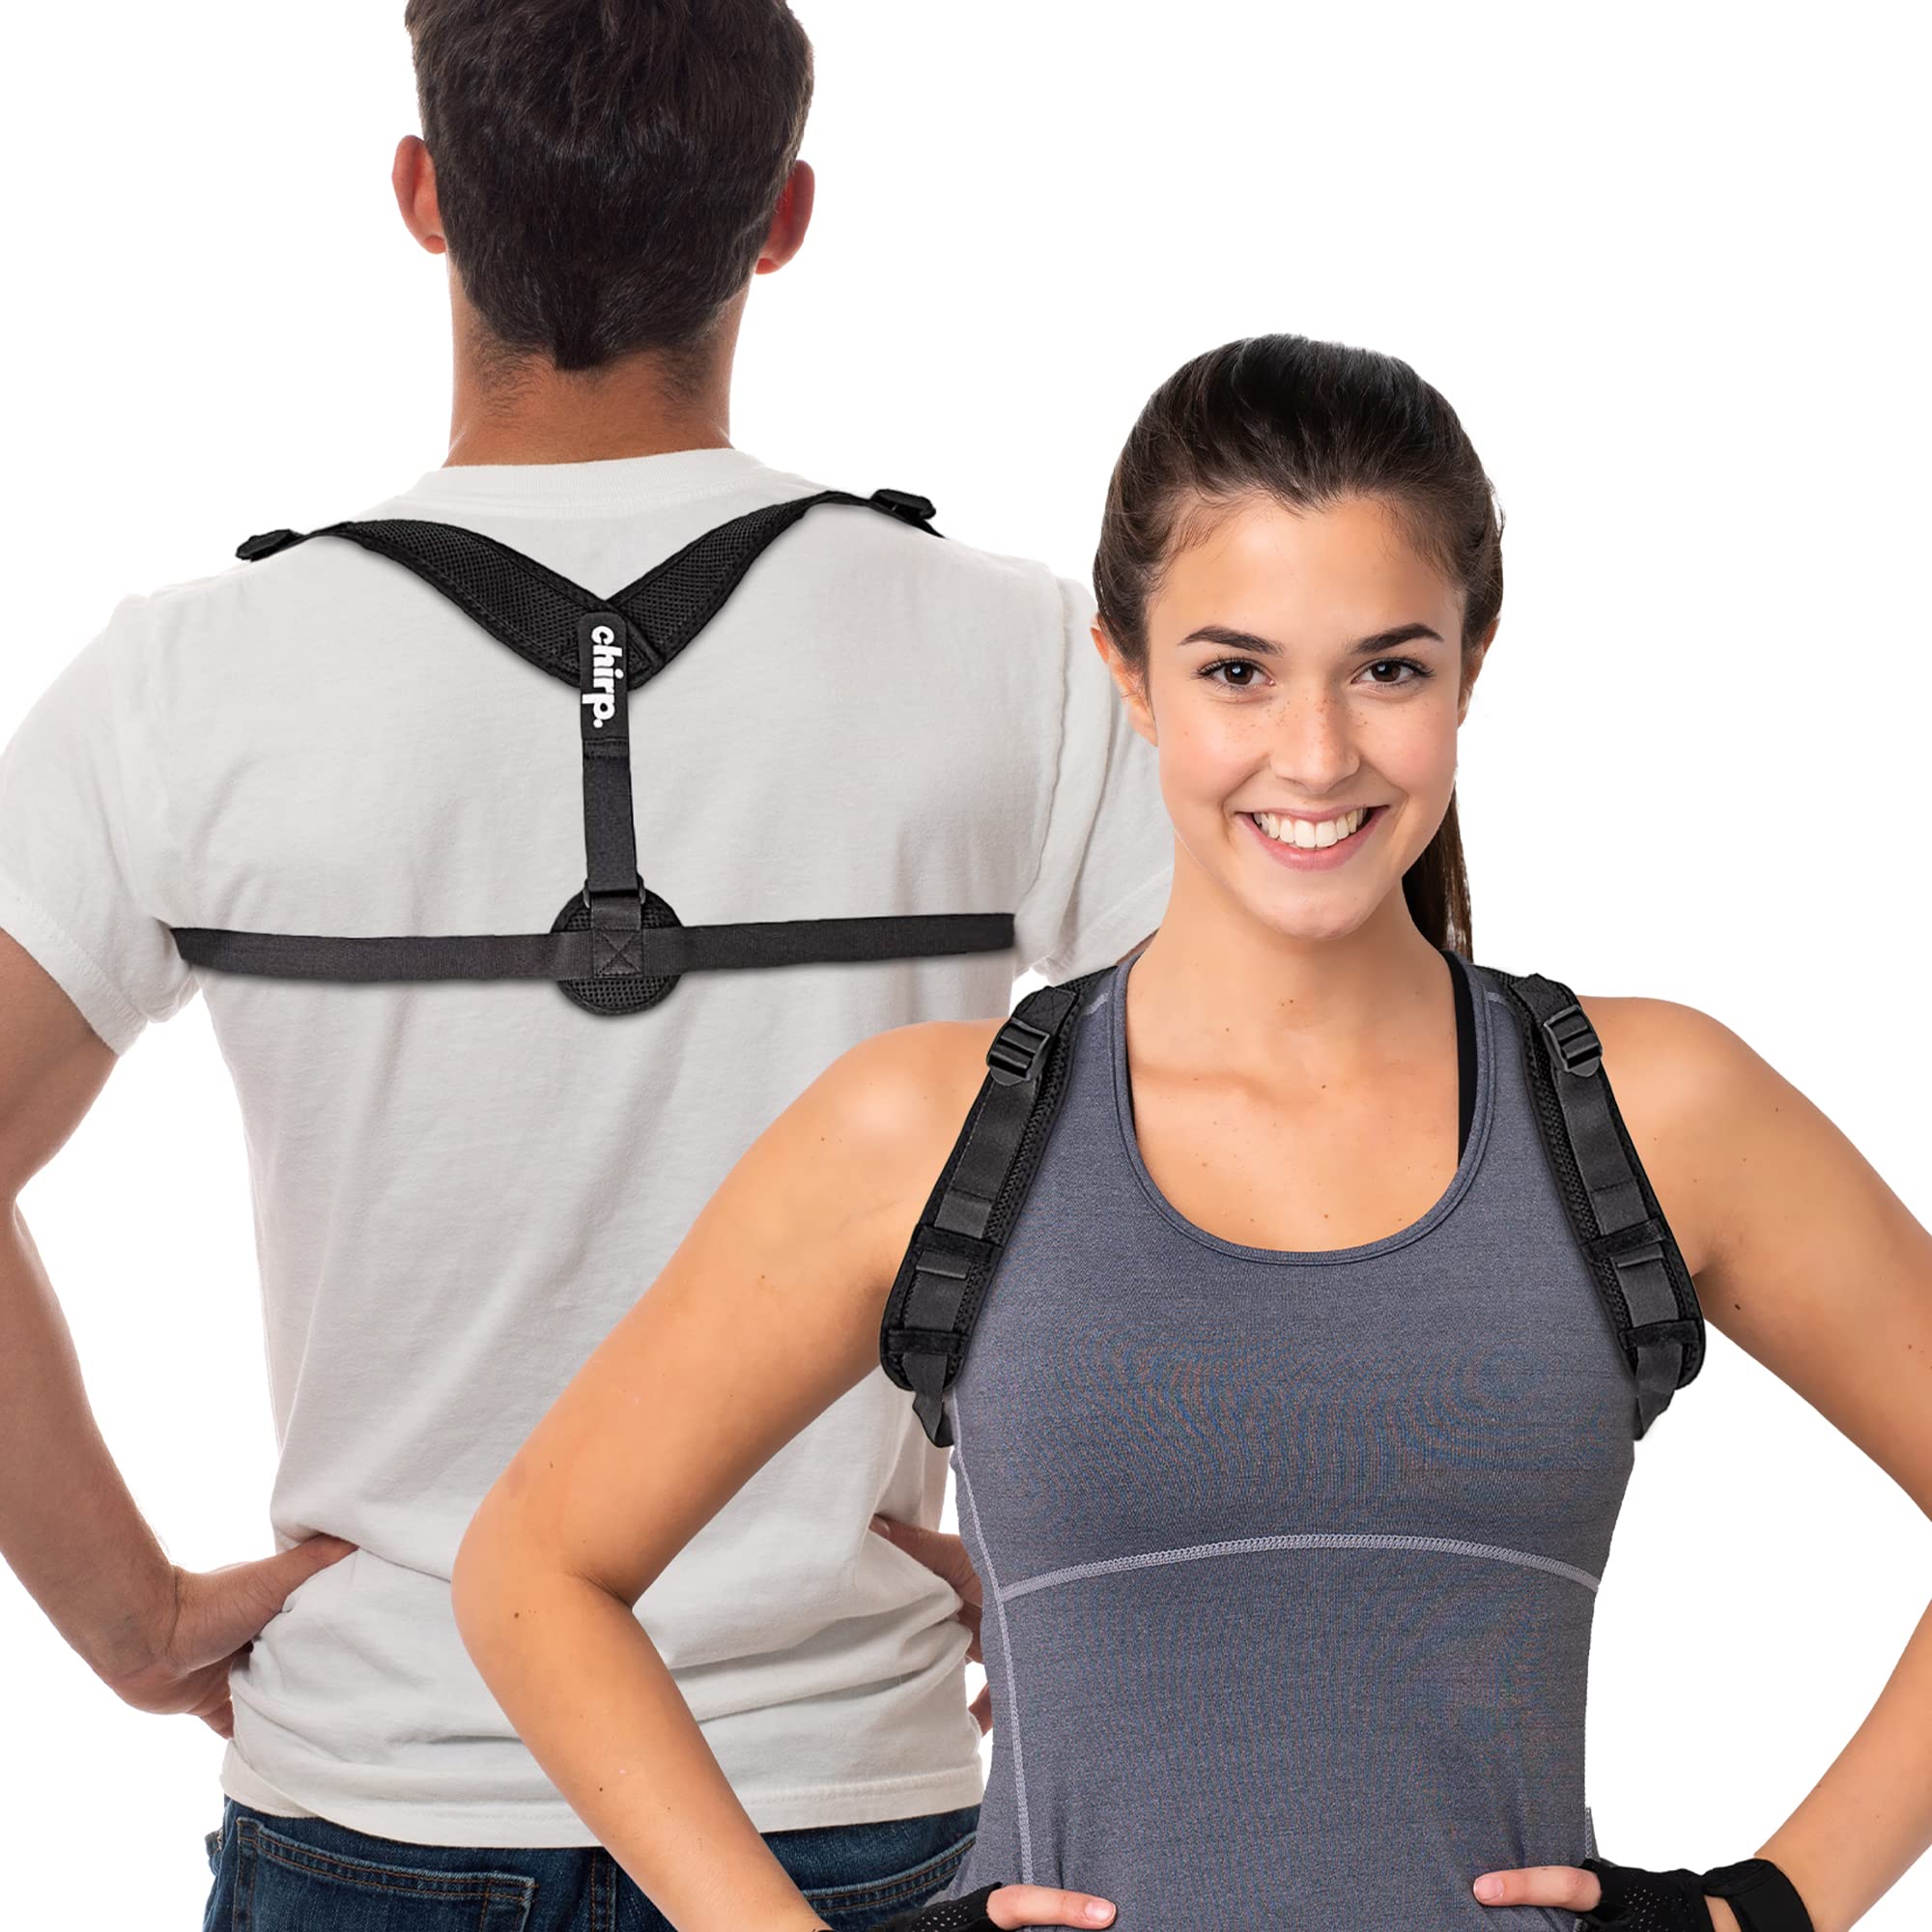 Posture Corrector for Men and Women